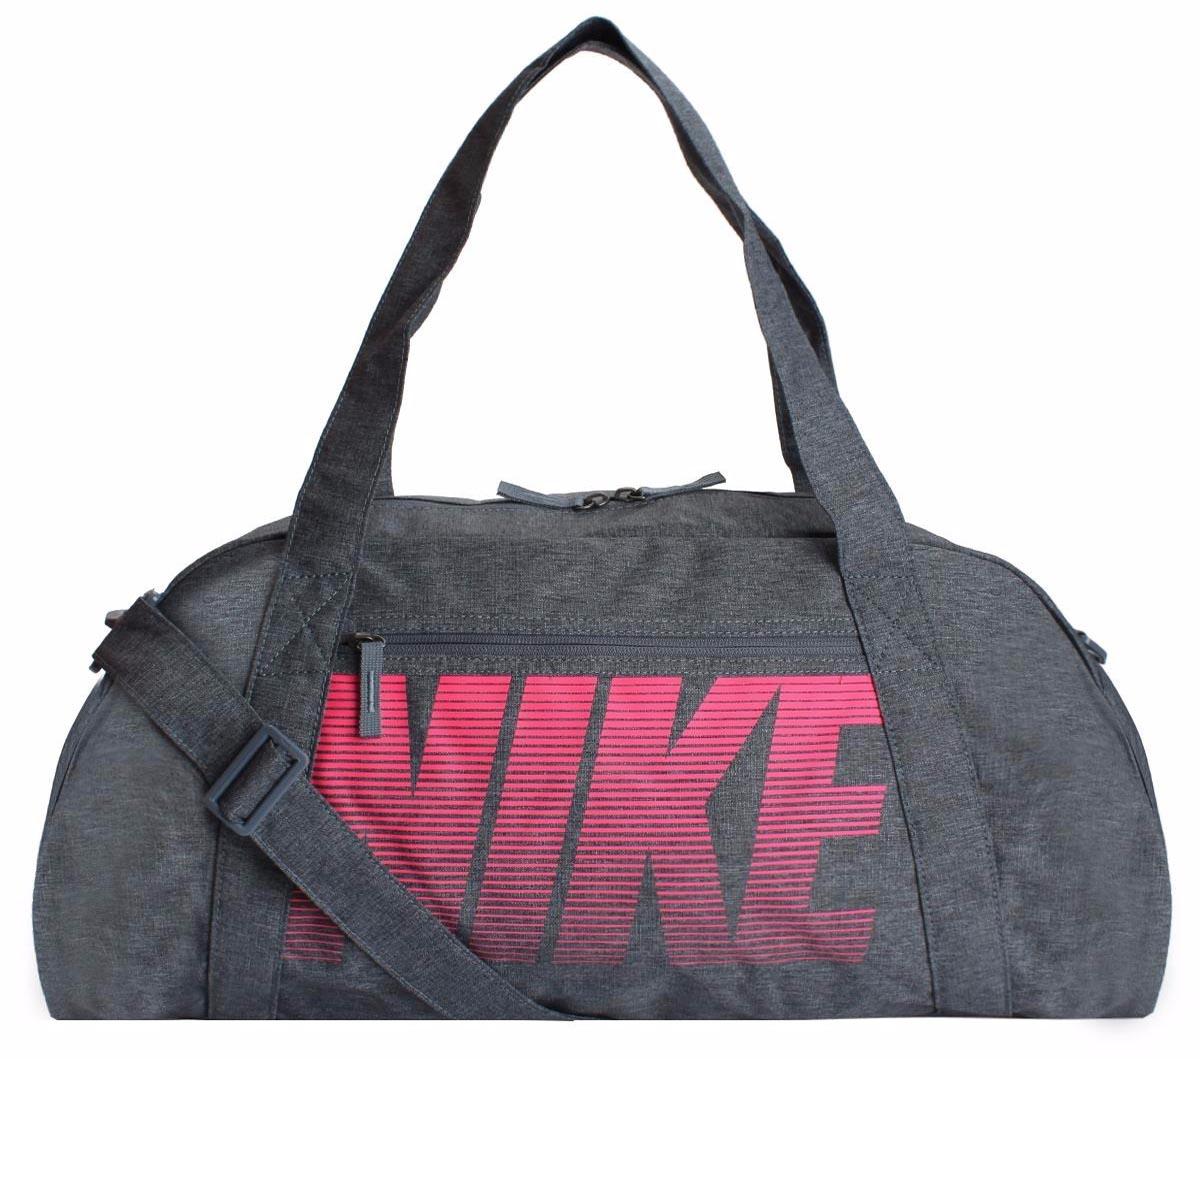 Buy Nike Gym Club Duffle Bag (Charcoal) Online at Lowest Price in India